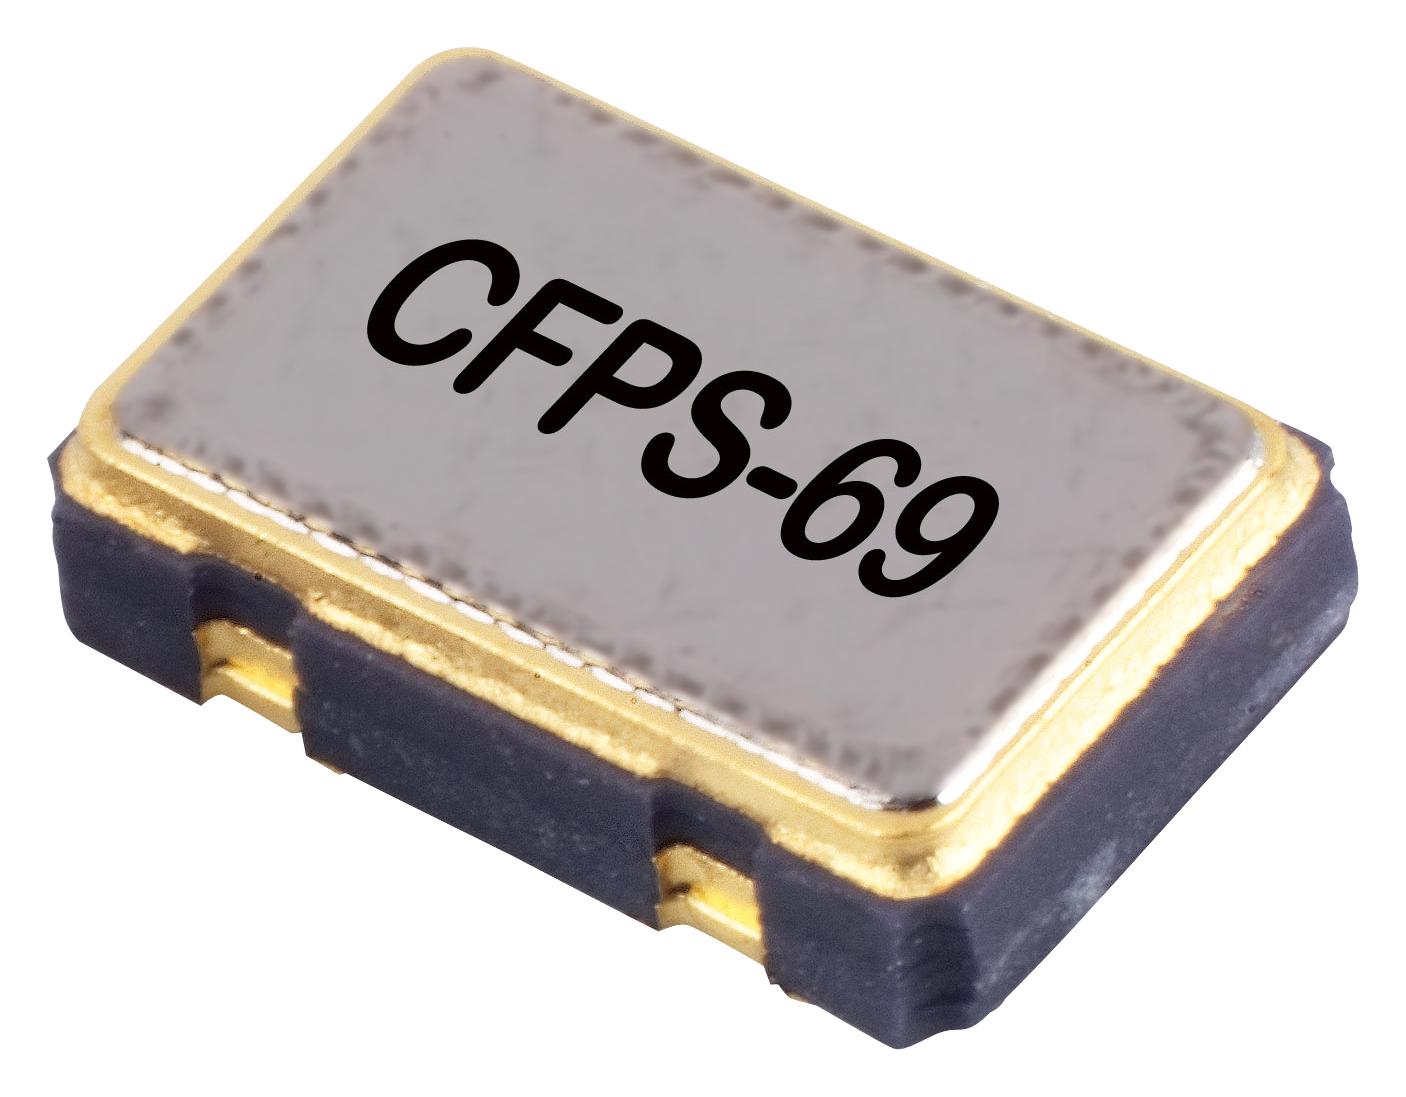 LFSPXO009588 CRYSTAL OSCILLATOR, SMD, 24MHZ IQD FREQUENCY PRODUCTS